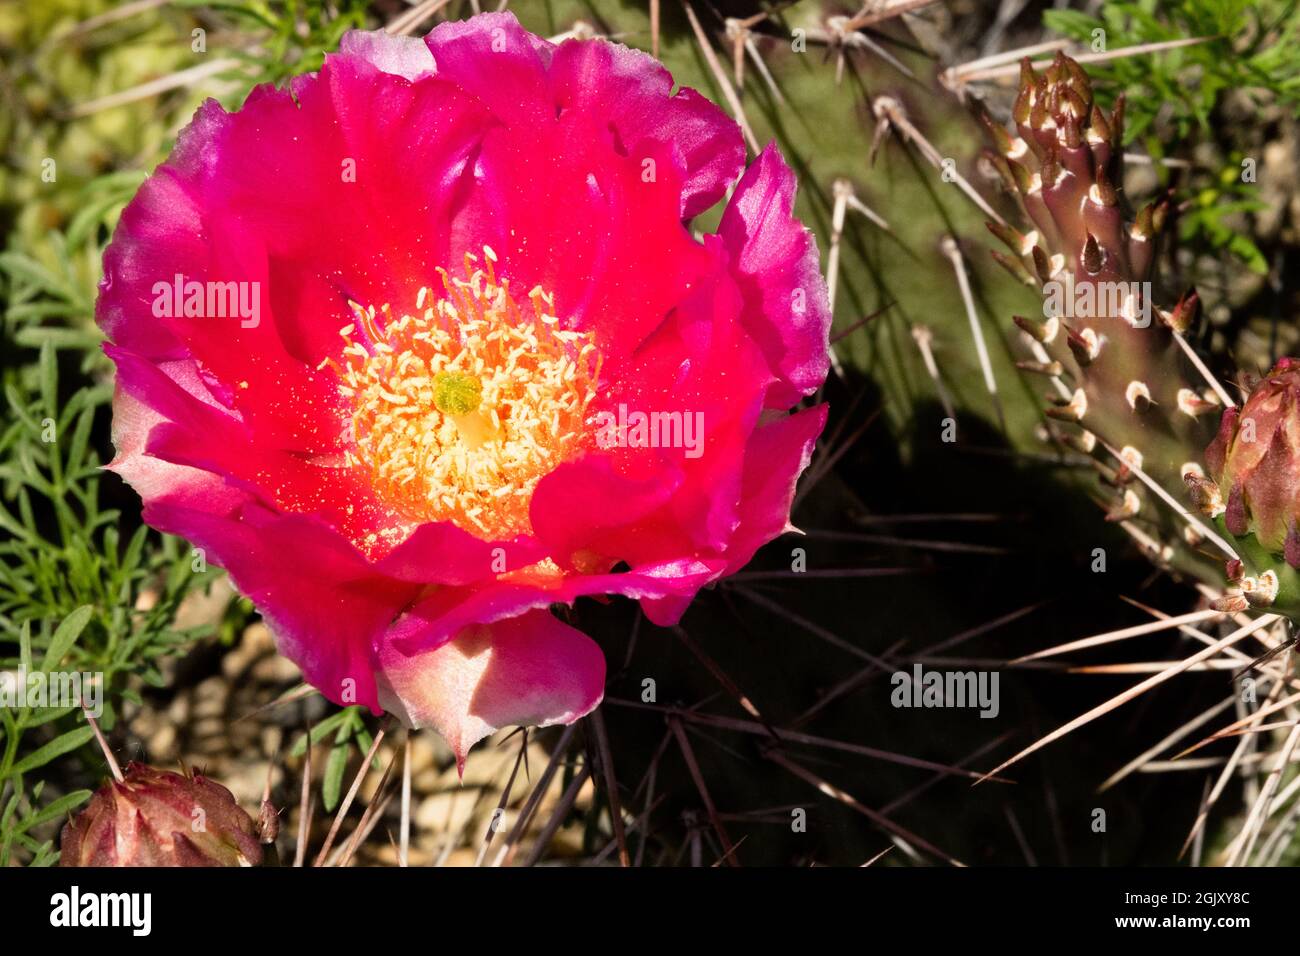 Mojave Rouge Prickly poire cactus Opuntia fleur Opuntia polyacantha Banque D'Images